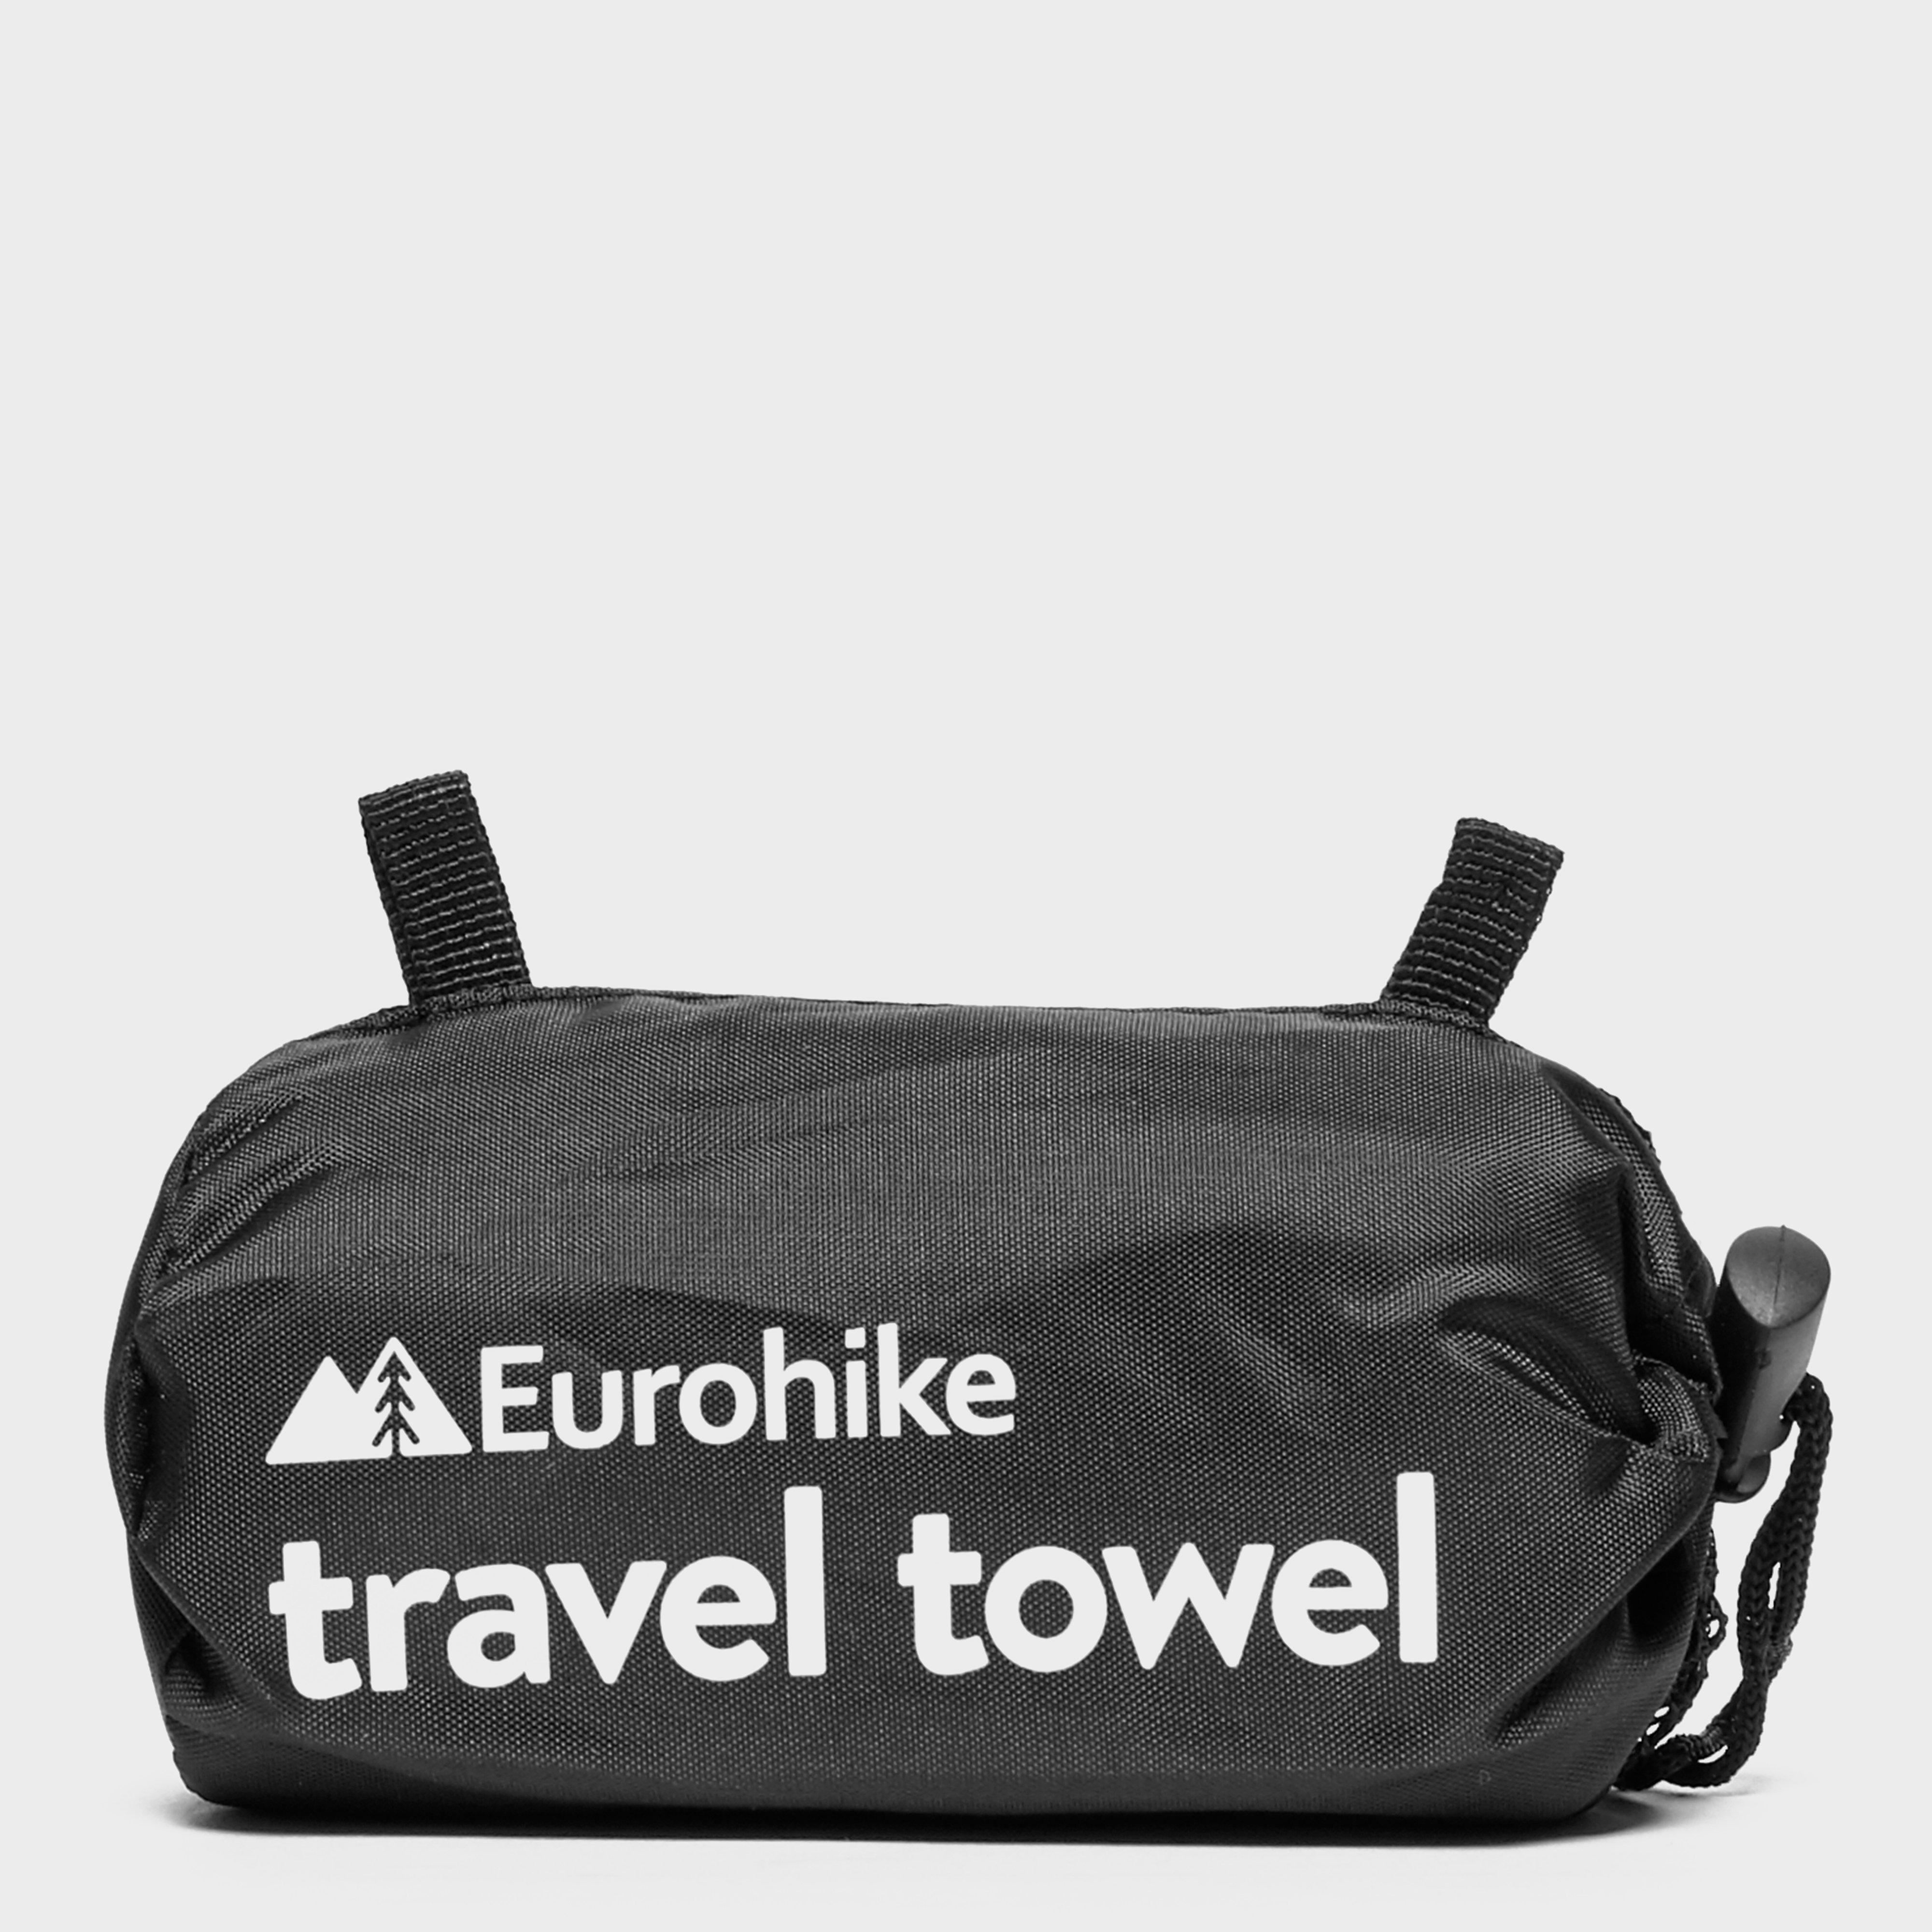 Eurohike Microfibre Suede Travel Towel – Small Review